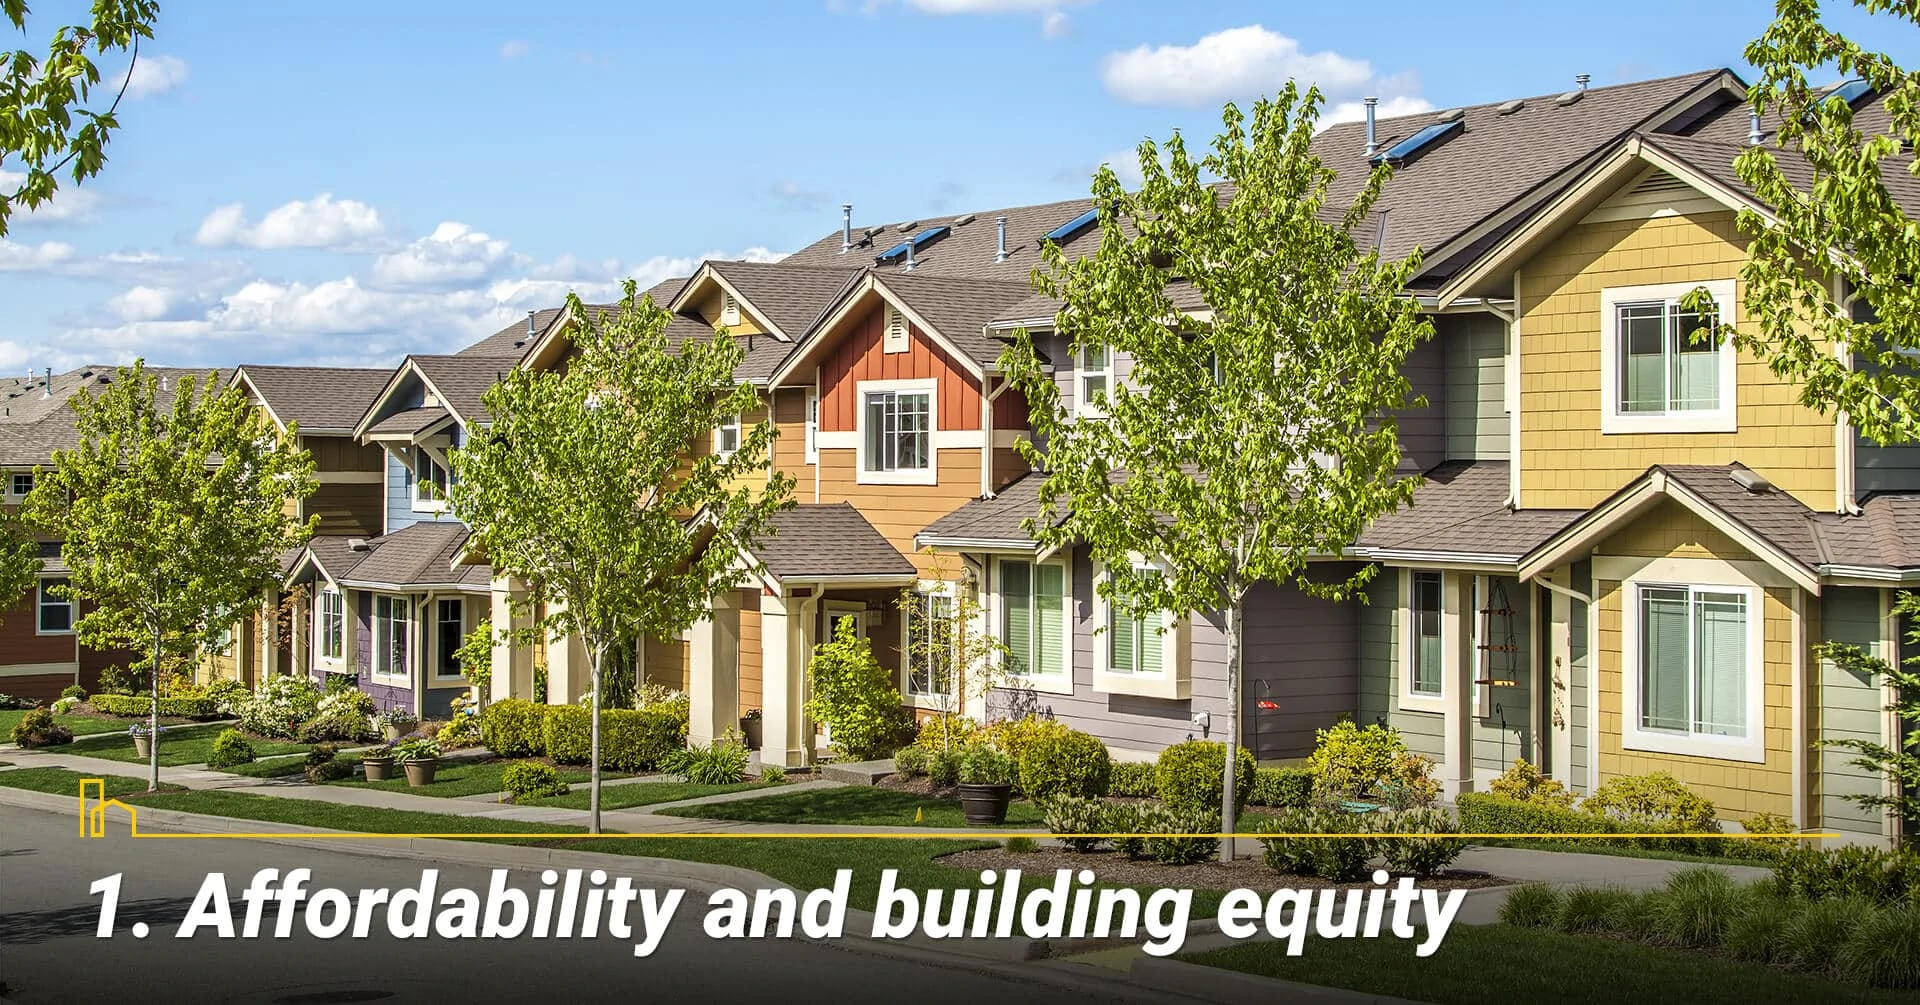 Affordability and building equity, build wealth